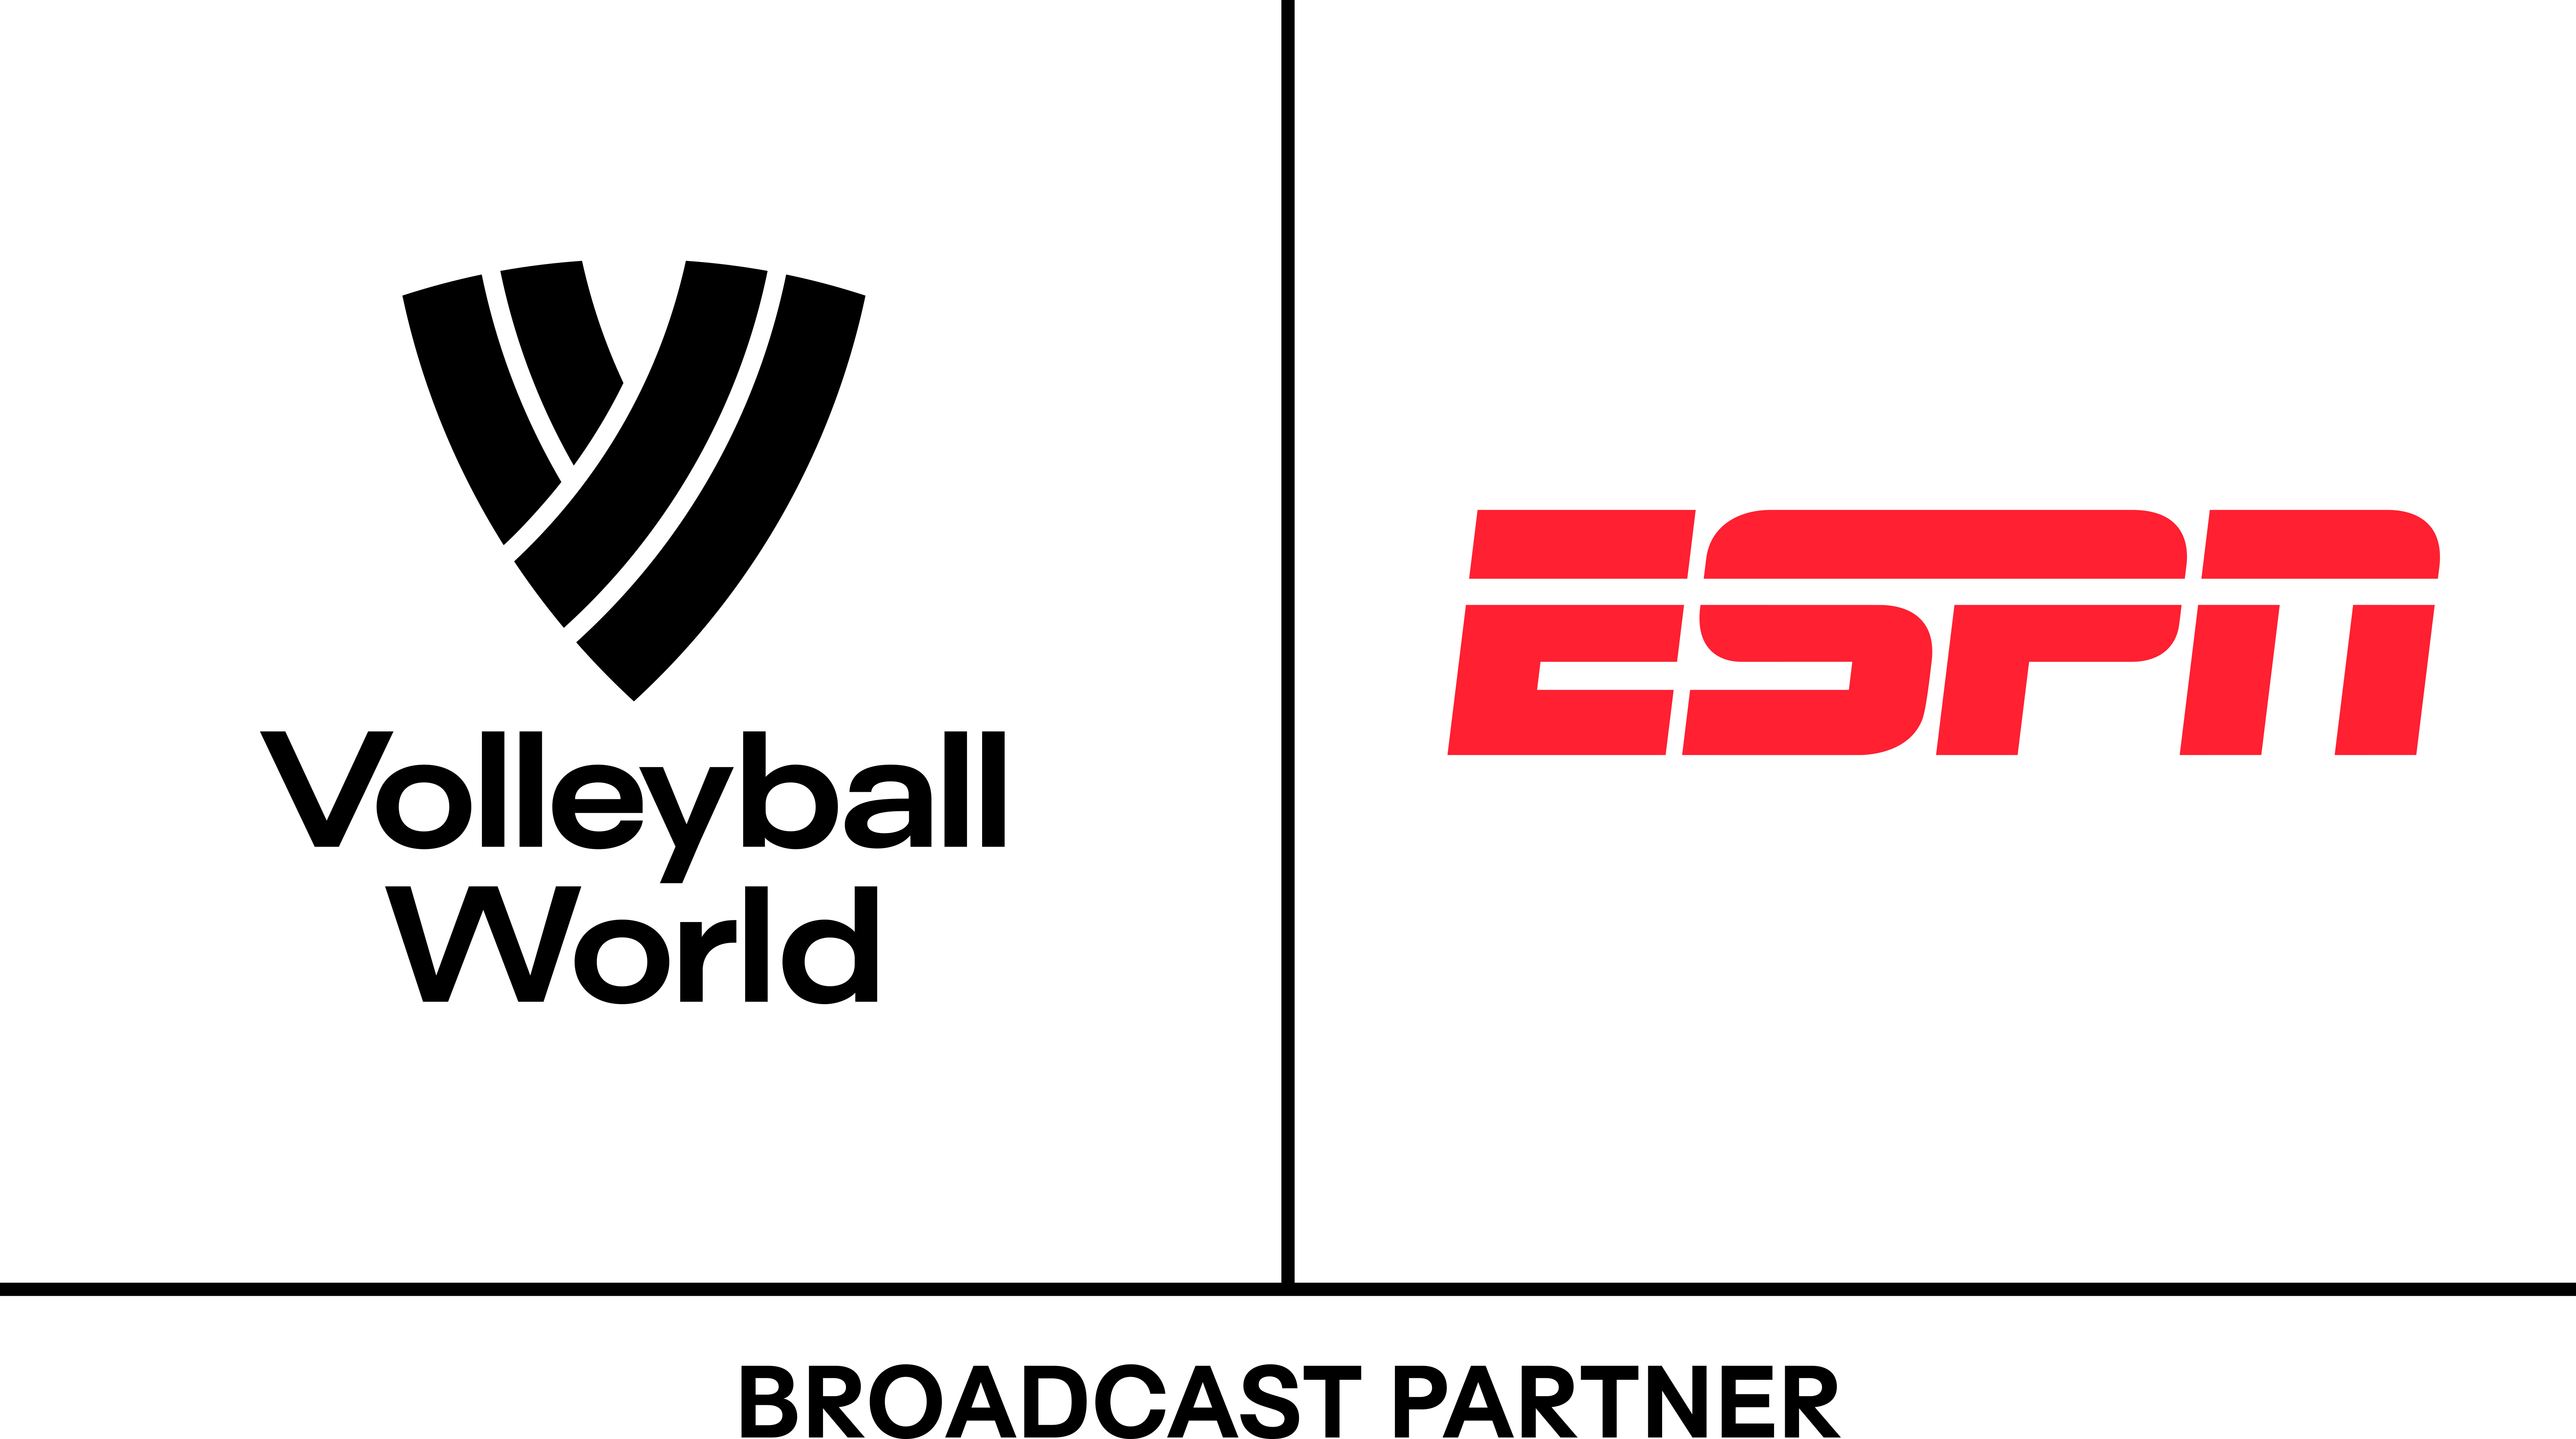 Volleyball World agrees to significant multi-year broadcast partnership with ESPN in Latin America volleyballworld